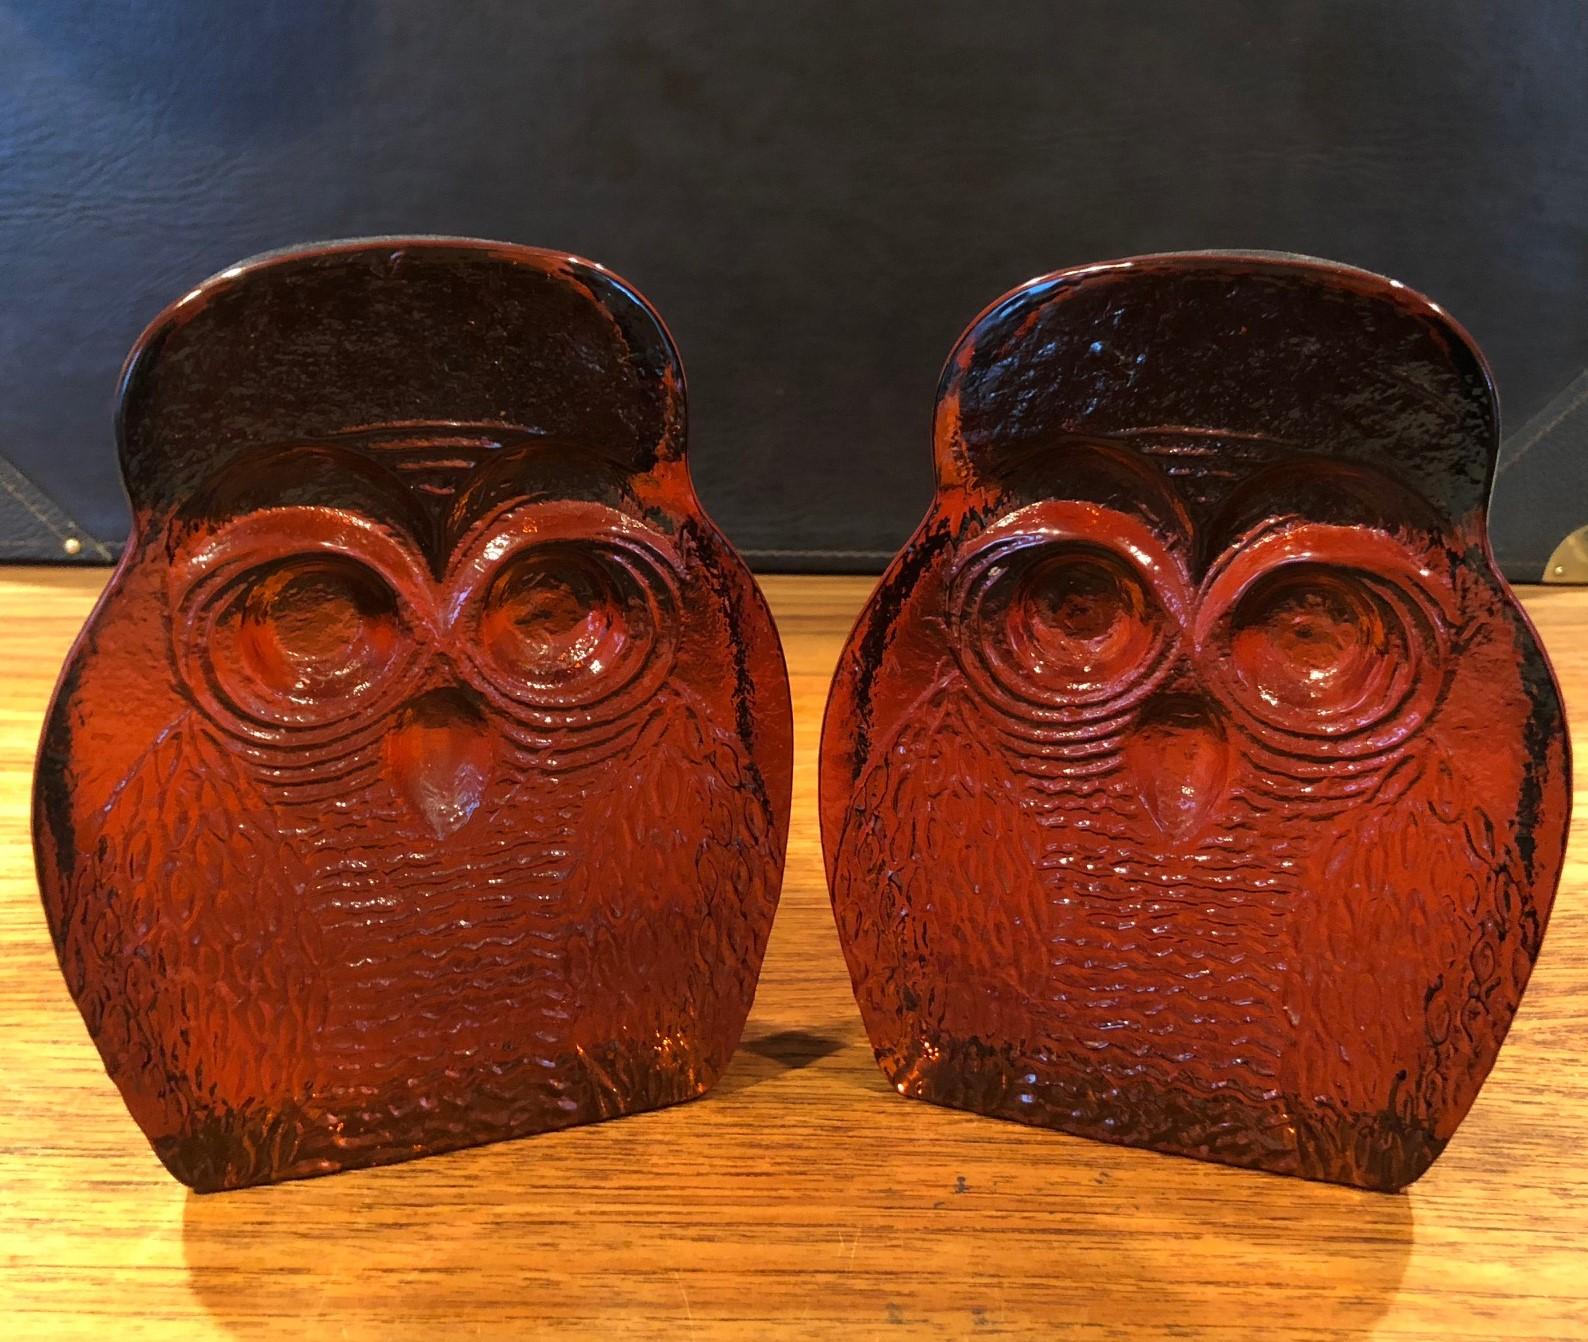 Midcentury pair of handblown amber colored owl bookends by Blenko, circa 1960s. The bookends are heavy and solid with a smooth back side a finish and a textural finish on the front. Very cool decorative item.  #467